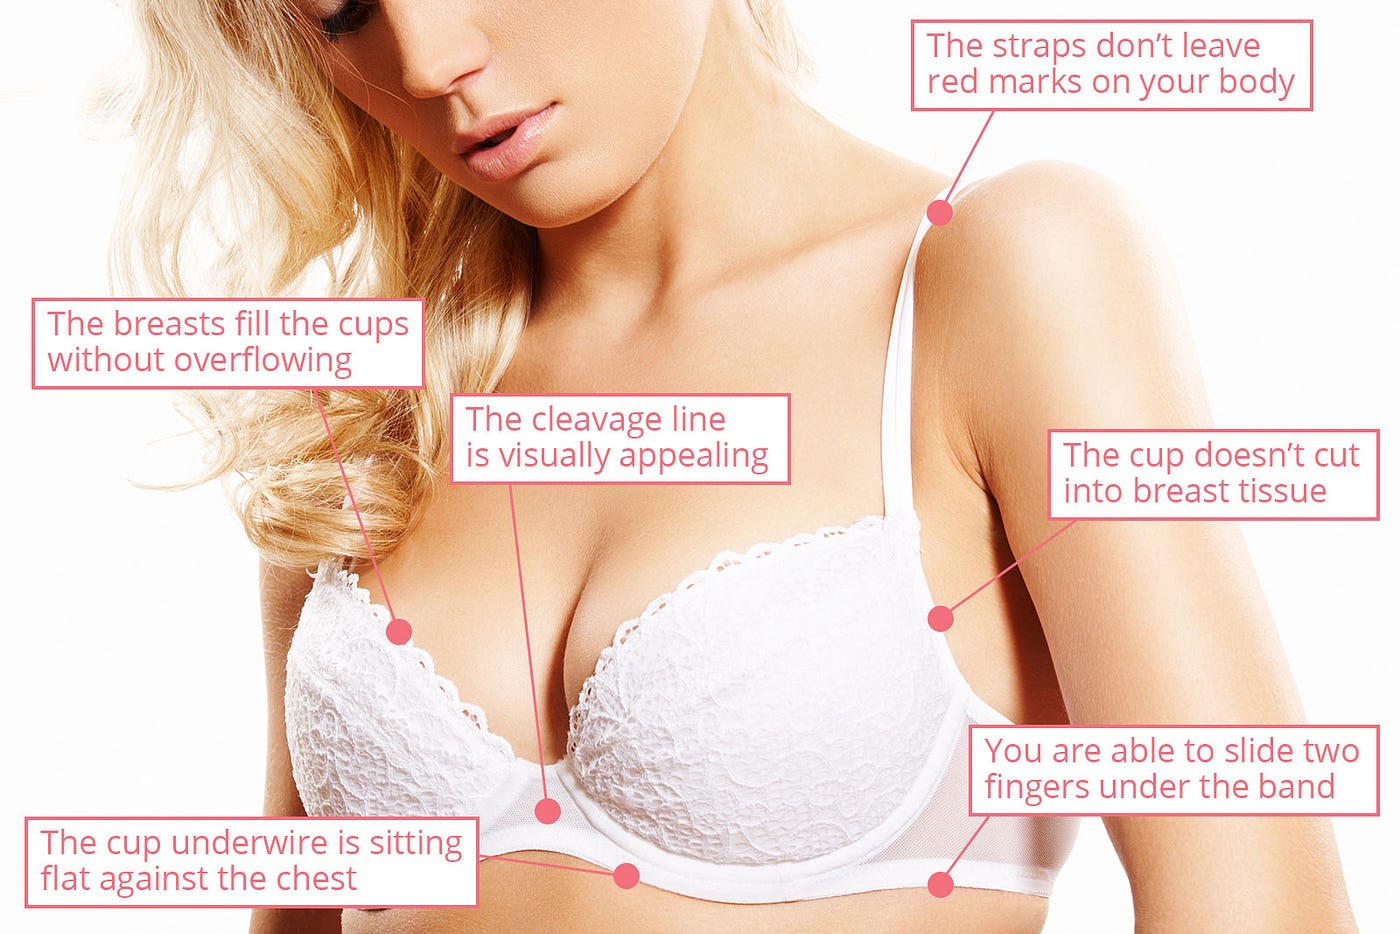 How to Measure Bra Size at Home and Look Like a Goddess